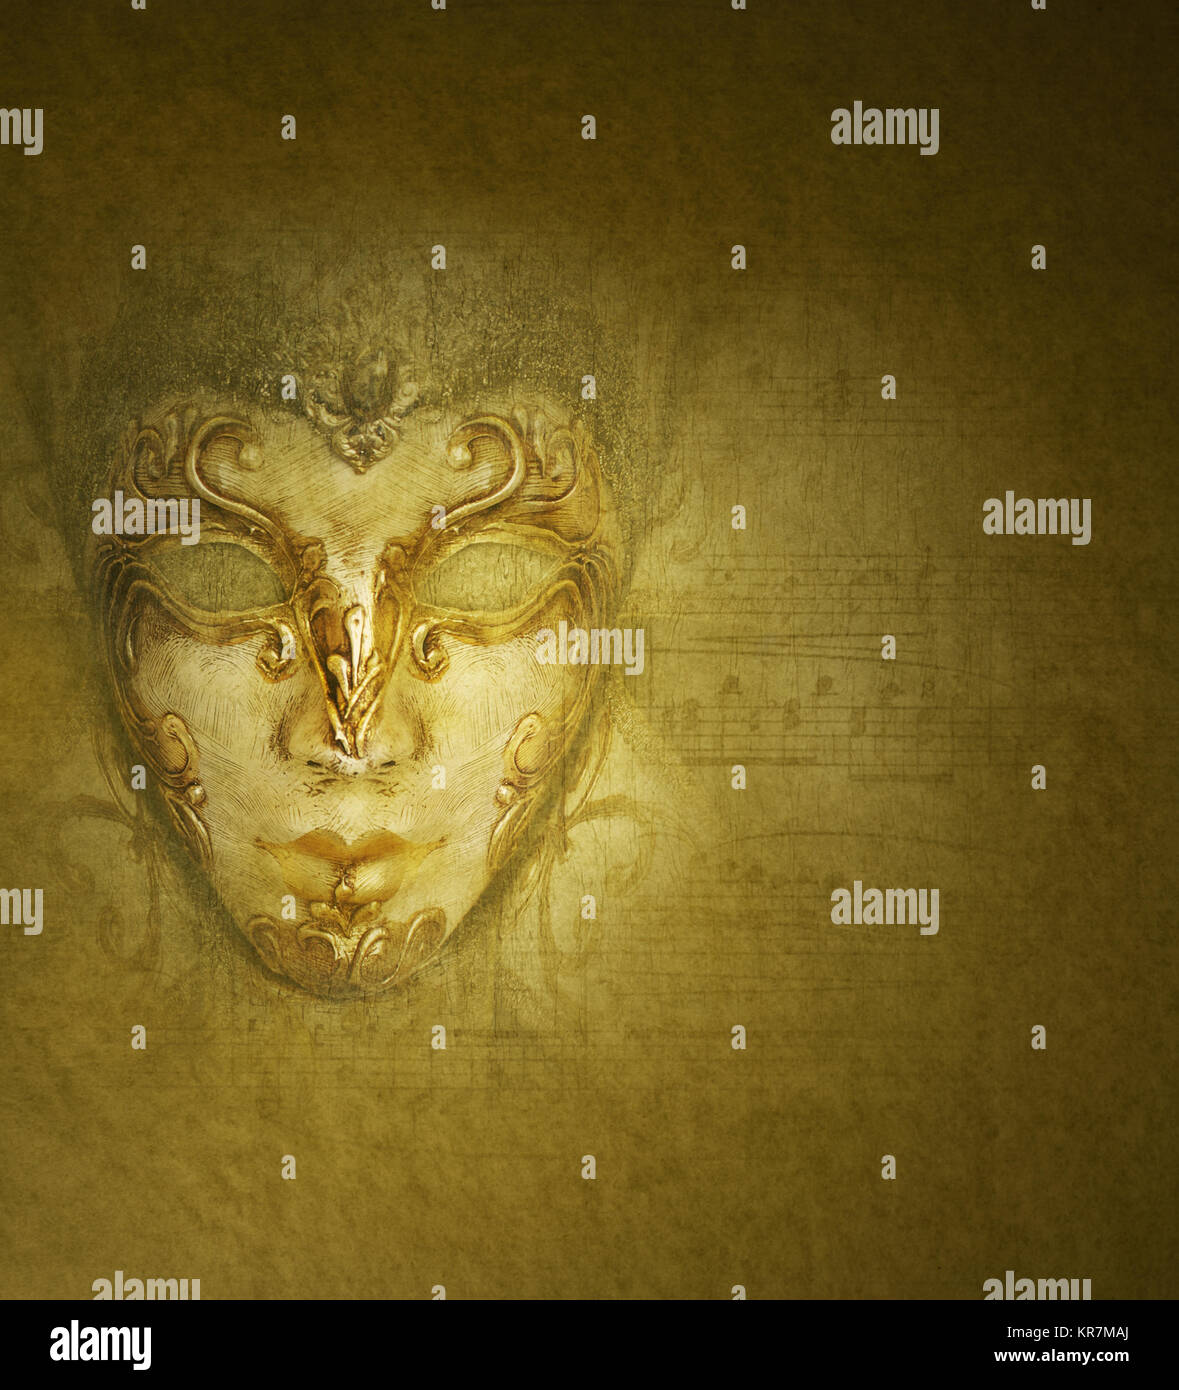 Beautiful vintage background golden mask with musical score in the background Stock Photo